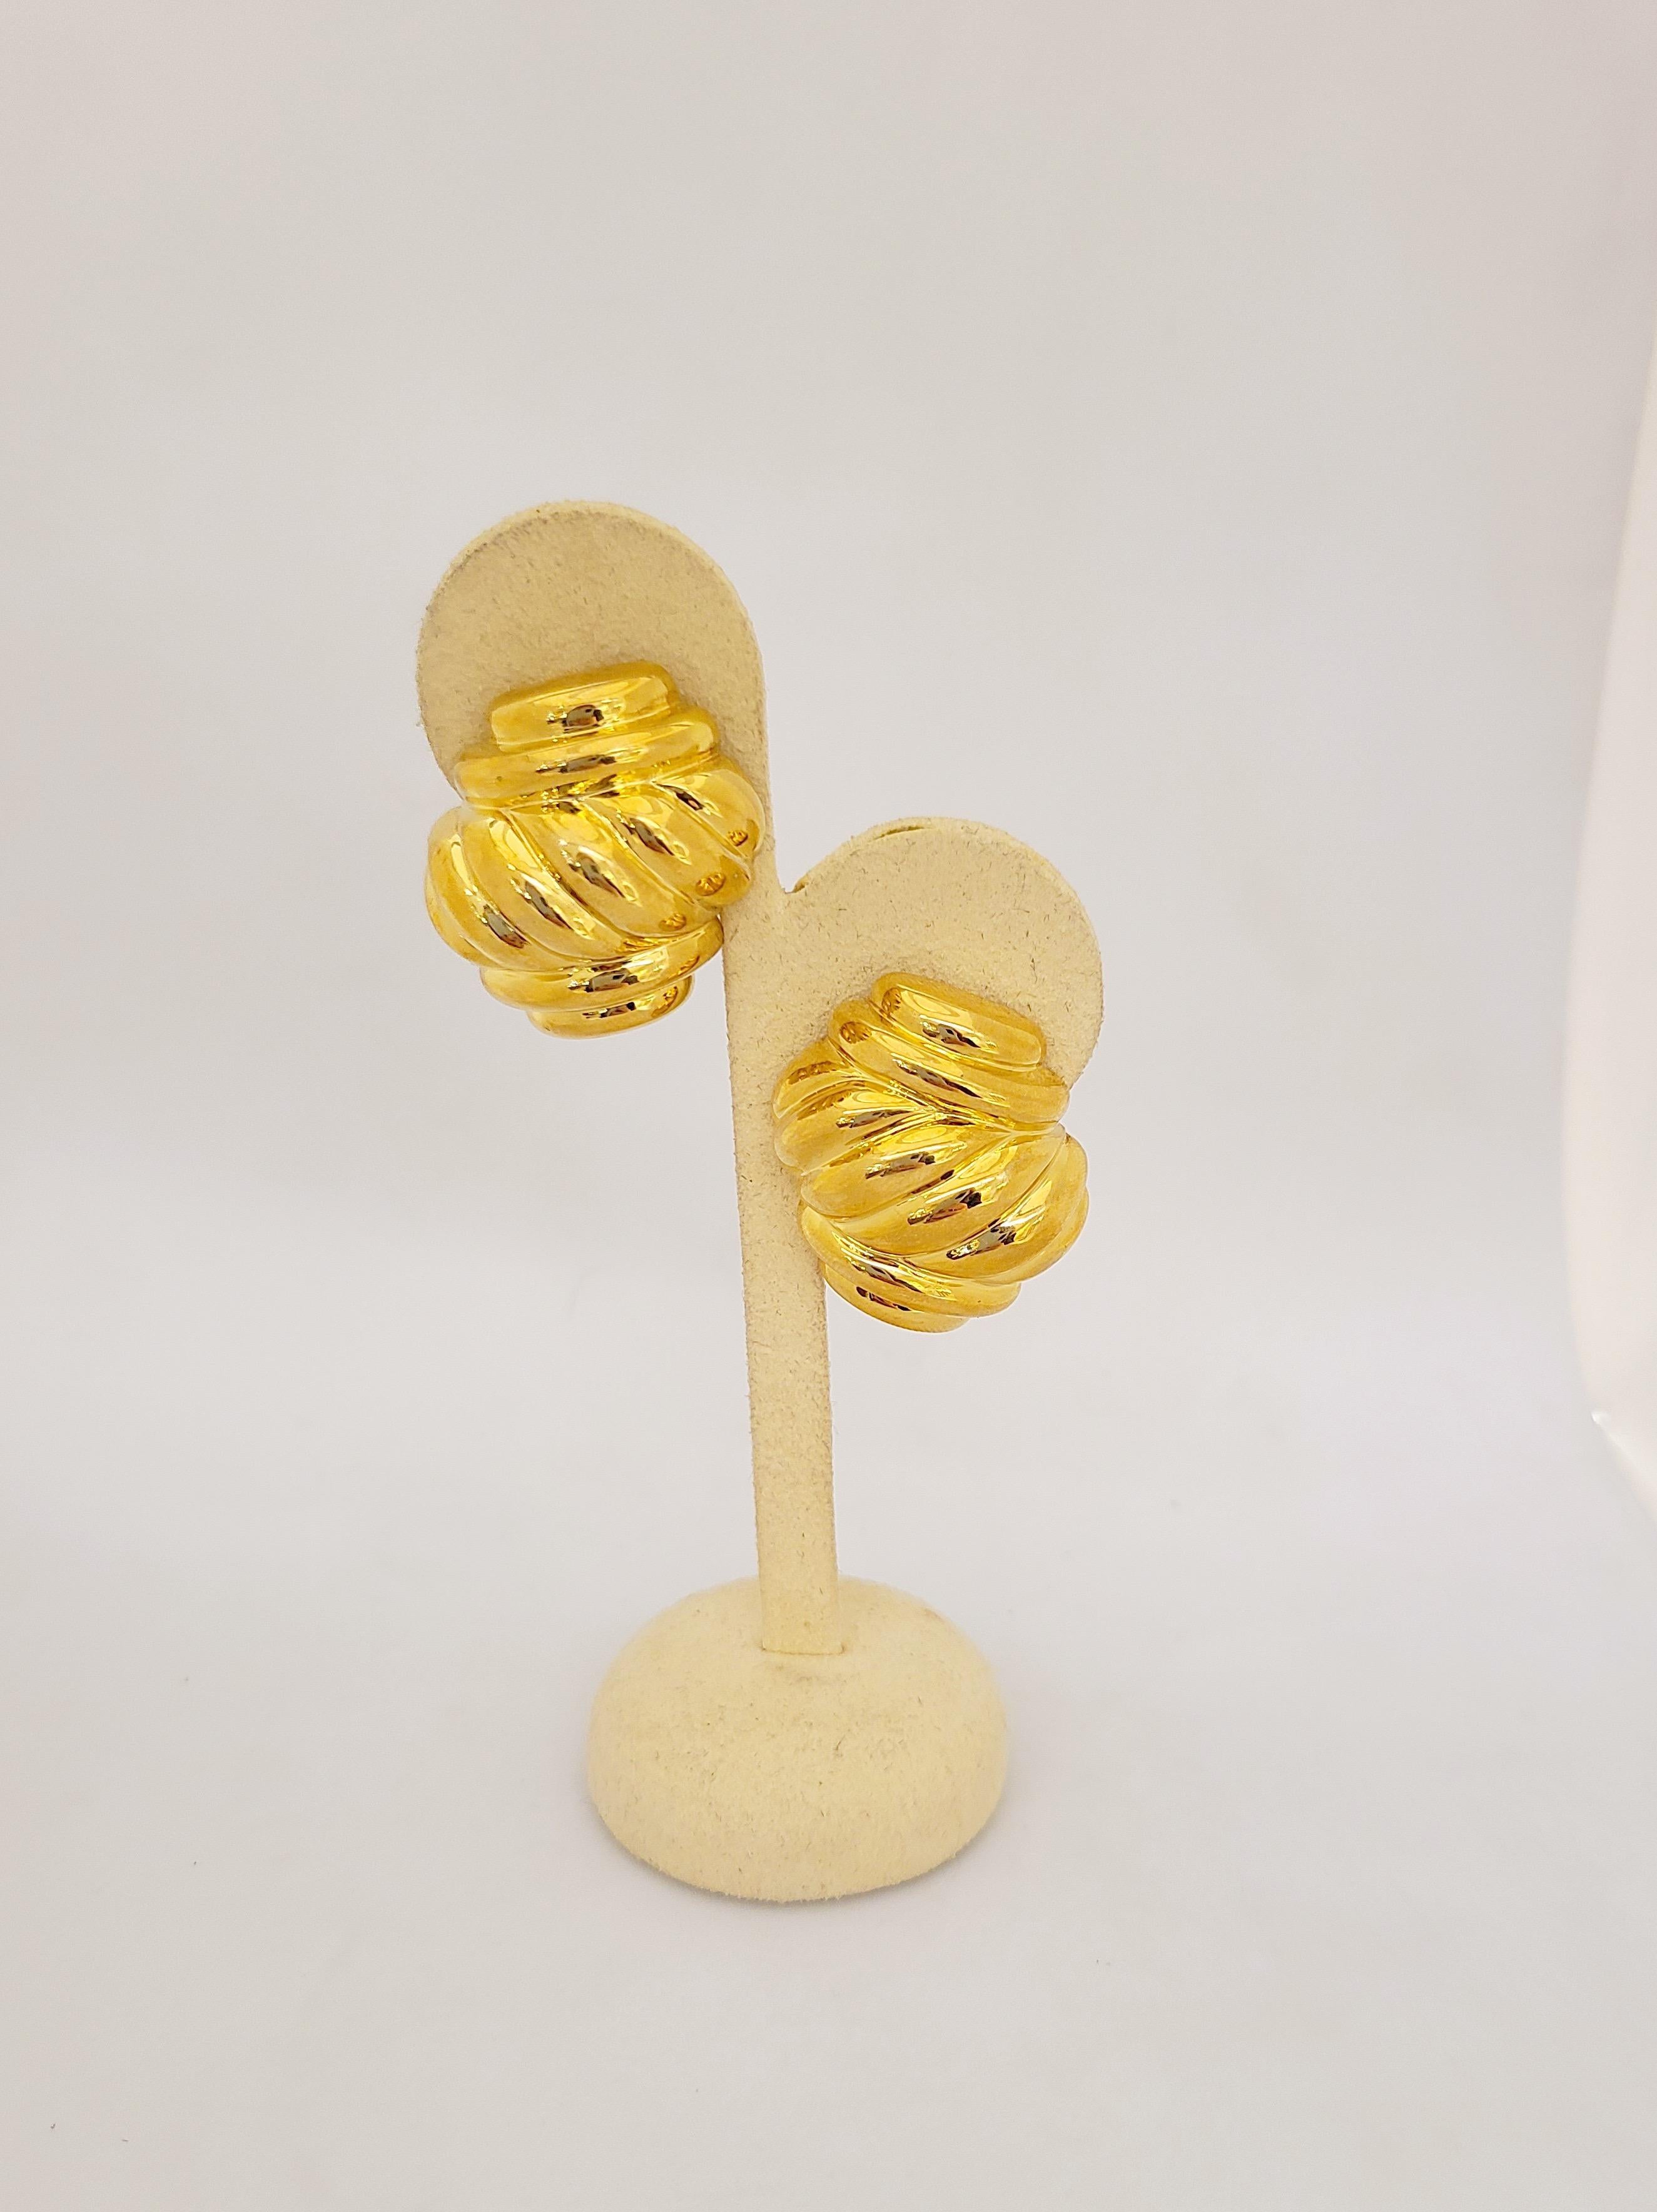 Designed by the legendary Charles Turi Jewelry Company. These classic 18 karat yellow gold earrings are designed in a hi polished yellow gold twist motif. The earrings are pierced with a french clip and can be adjusted to clip on. The earrings